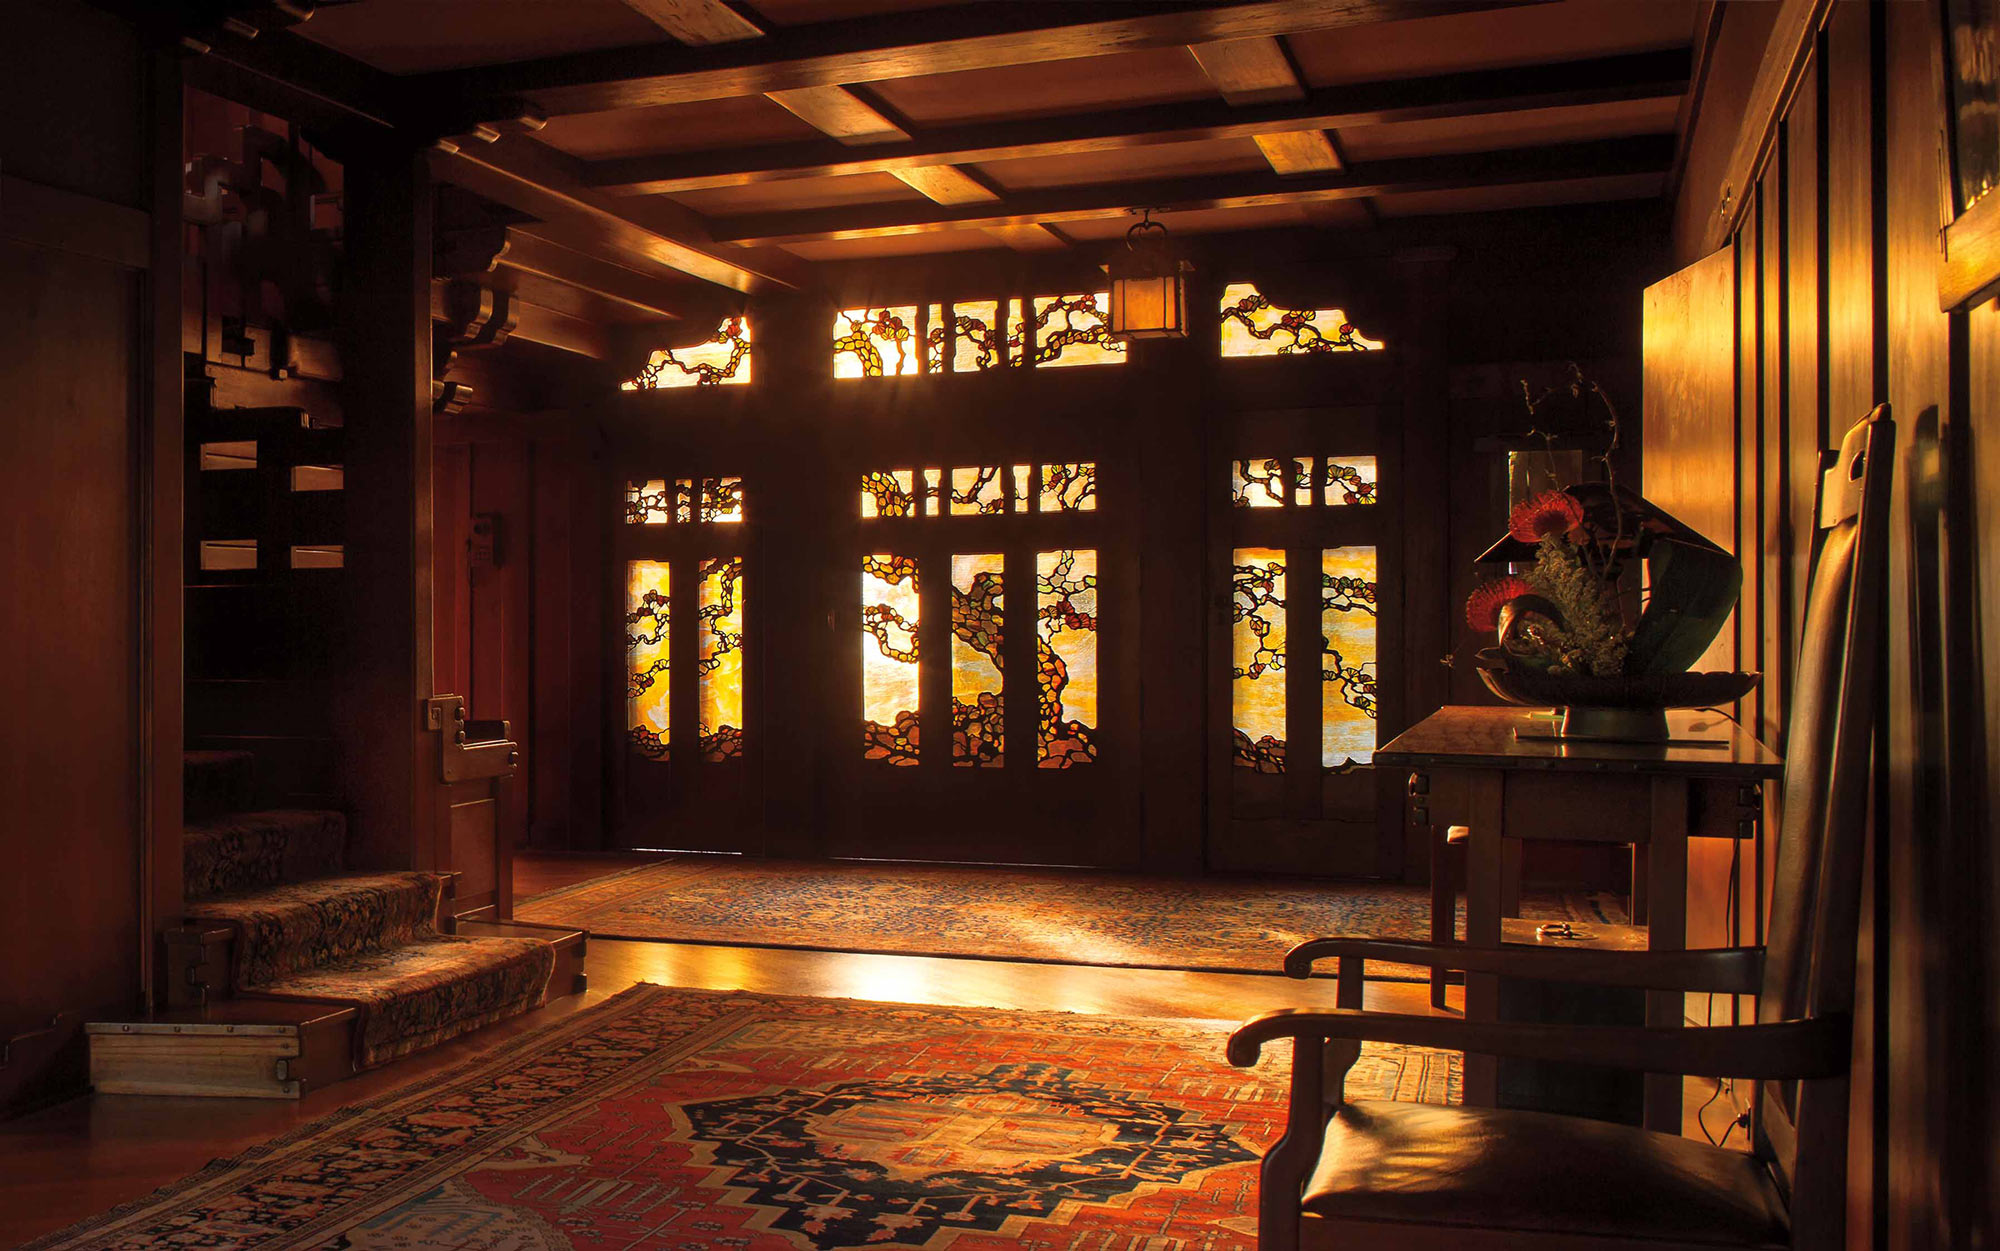 We join Tesserae to present: <br/>Early Music as Arts & Crafts at Gamble House